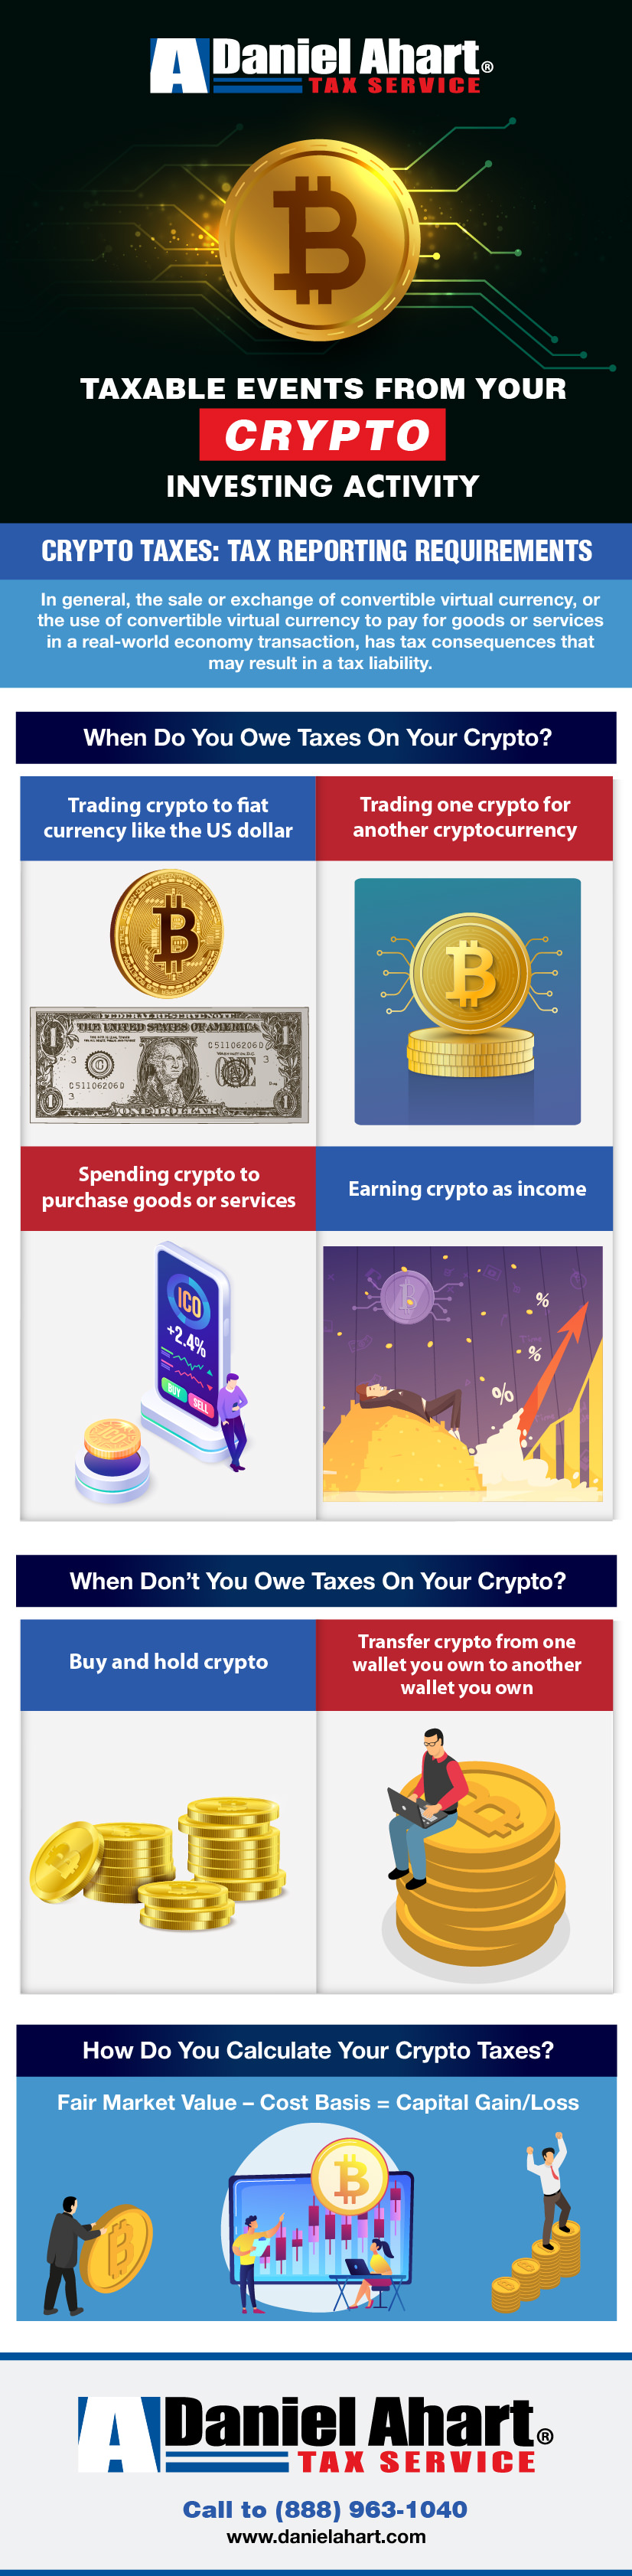 Taxable Events from your Crypto Investing Activity